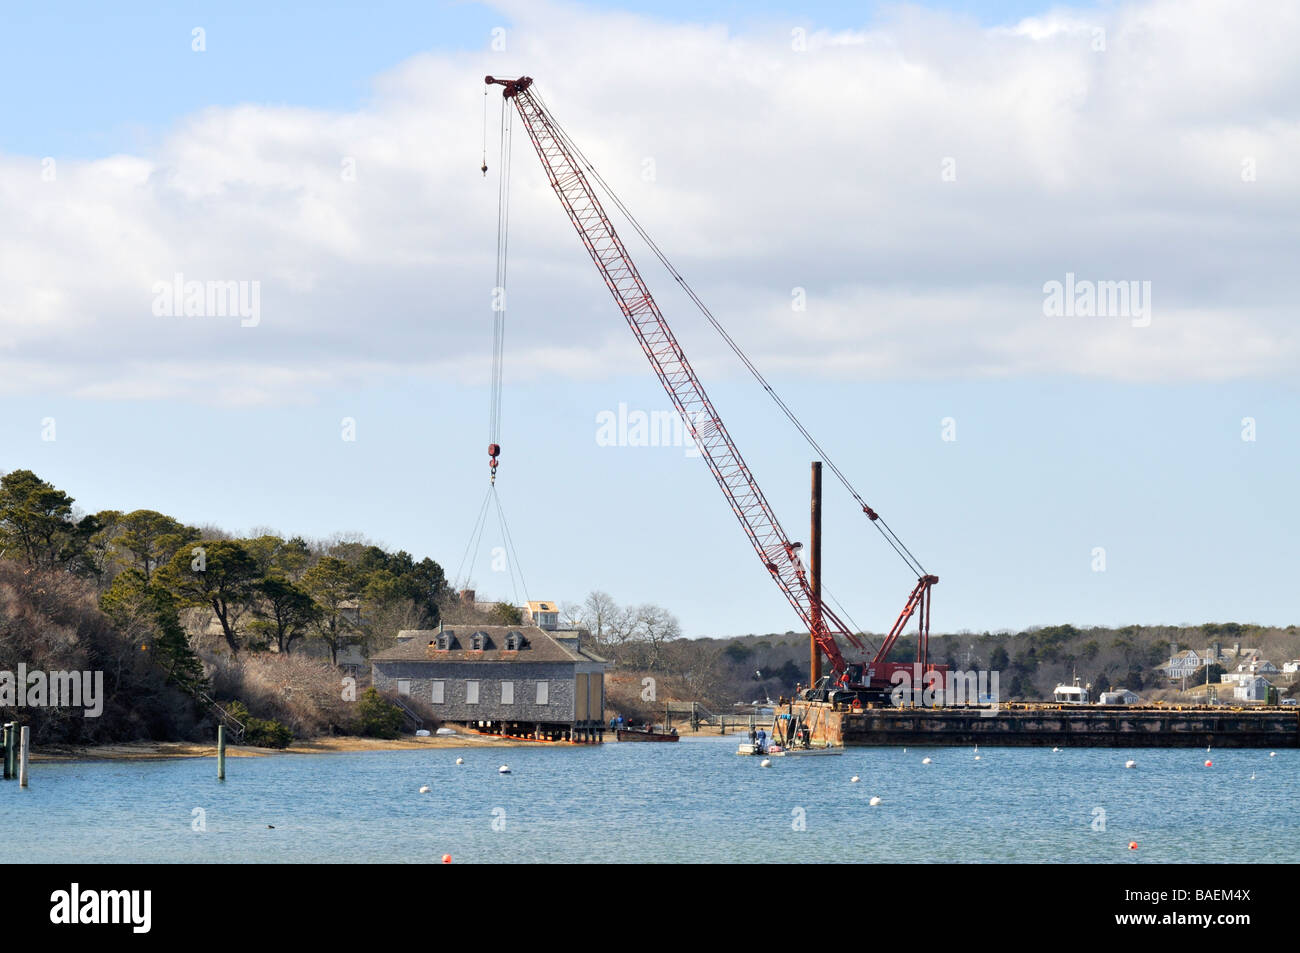 Crane on a barge preparing to lift and move a boat house in 'Stage Harbor' Chatham 'Cape Cod' Stock Photo